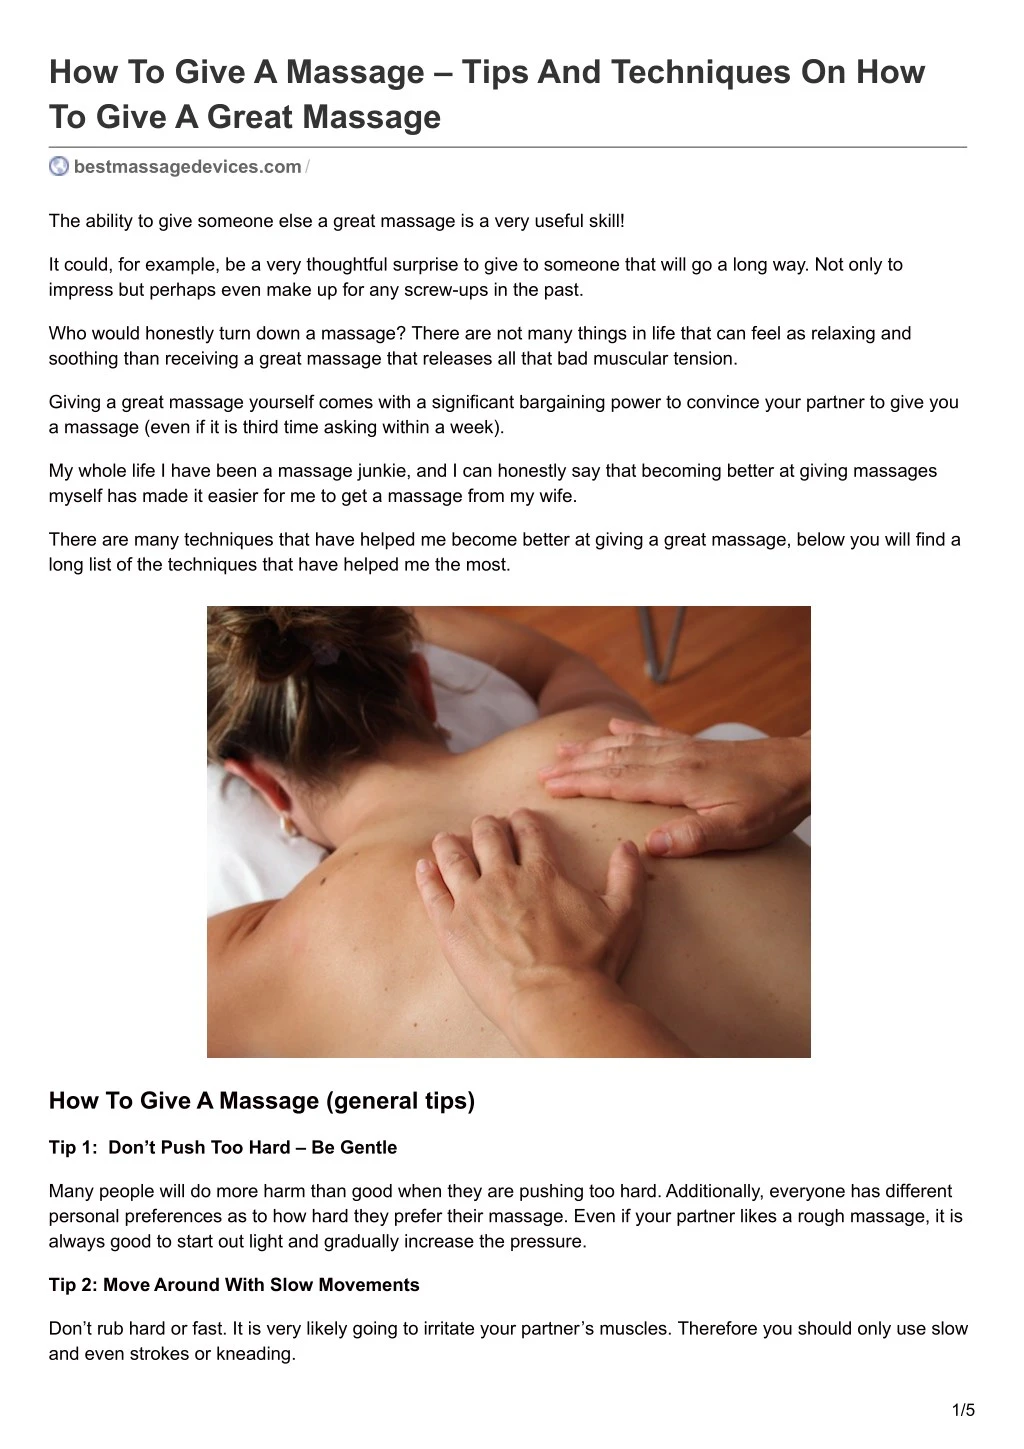 how to give a massage tips and techniques